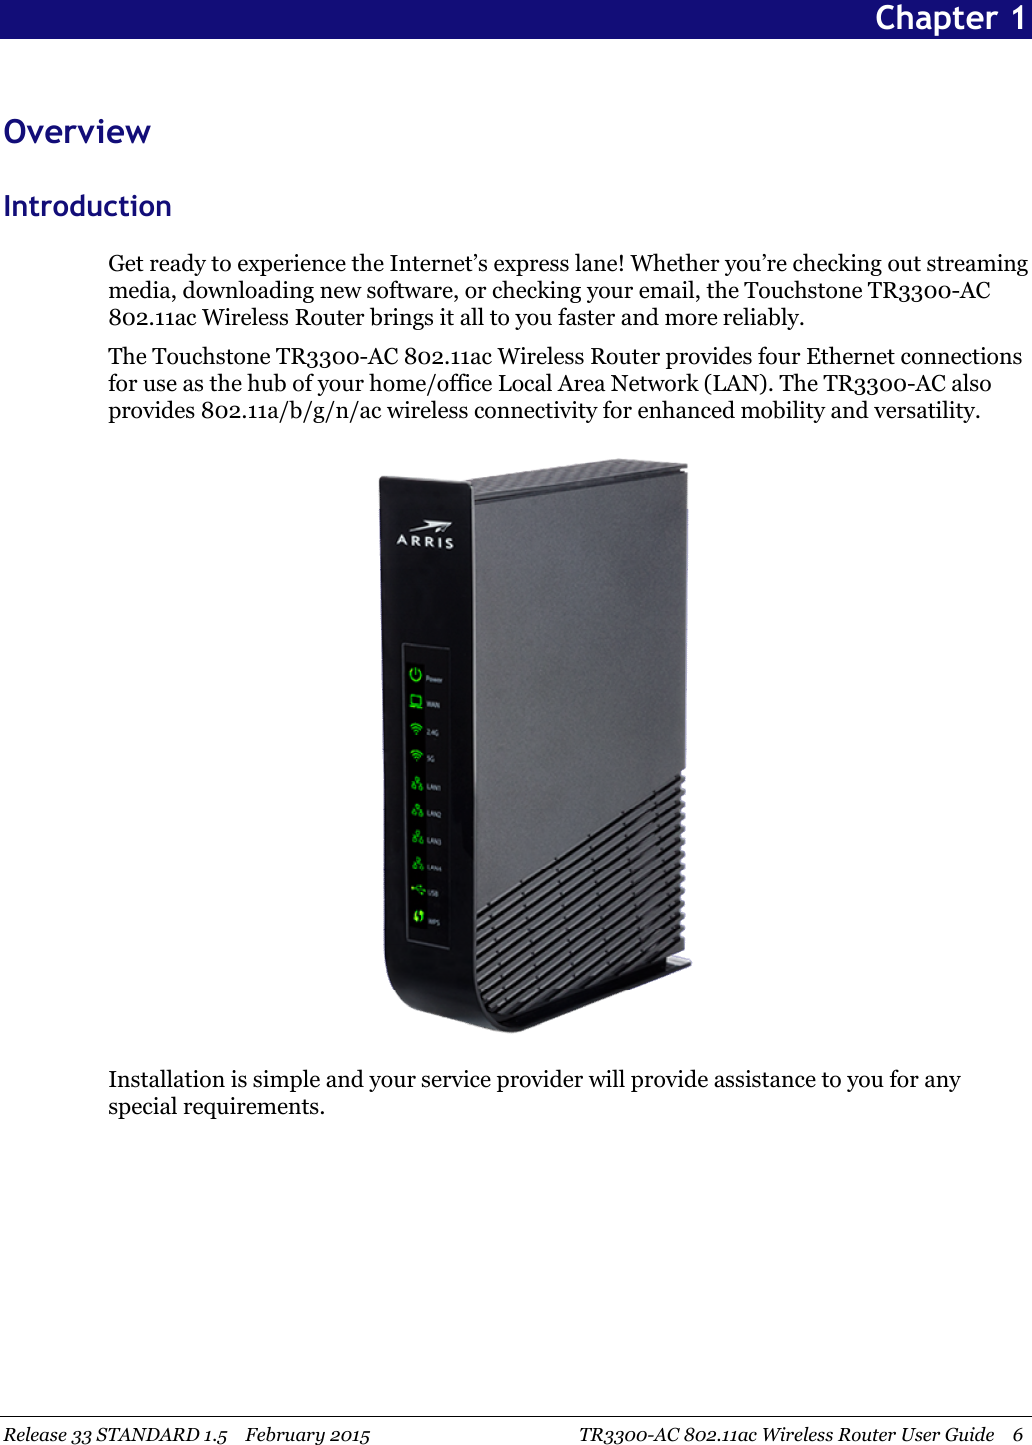 Release 33 STANDARD 1.5 February 2015 TR3300-AC 802.11ac Wireless Router User Guide 6Chapter 1OverviewIntroductionGet ready to experience the Internet’s express lane! Whether you’re checking out streamingmedia, downloading new software, or checking your email, the Touchstone TR3300-AC802.11ac Wireless Router brings it all to you faster and more reliably.The Touchstone TR3300-AC 802.11ac Wireless Router provides four Ethernet connectionsfor use as the hub of your home/office Local Area Network (LAN). The TR3300-AC alsoprovides 802.11a/b/g/n/ac wireless connectivity for enhanced mobility and versatility.Installation is simple and your service provider will provide assistance to you for anyspecial requirements.